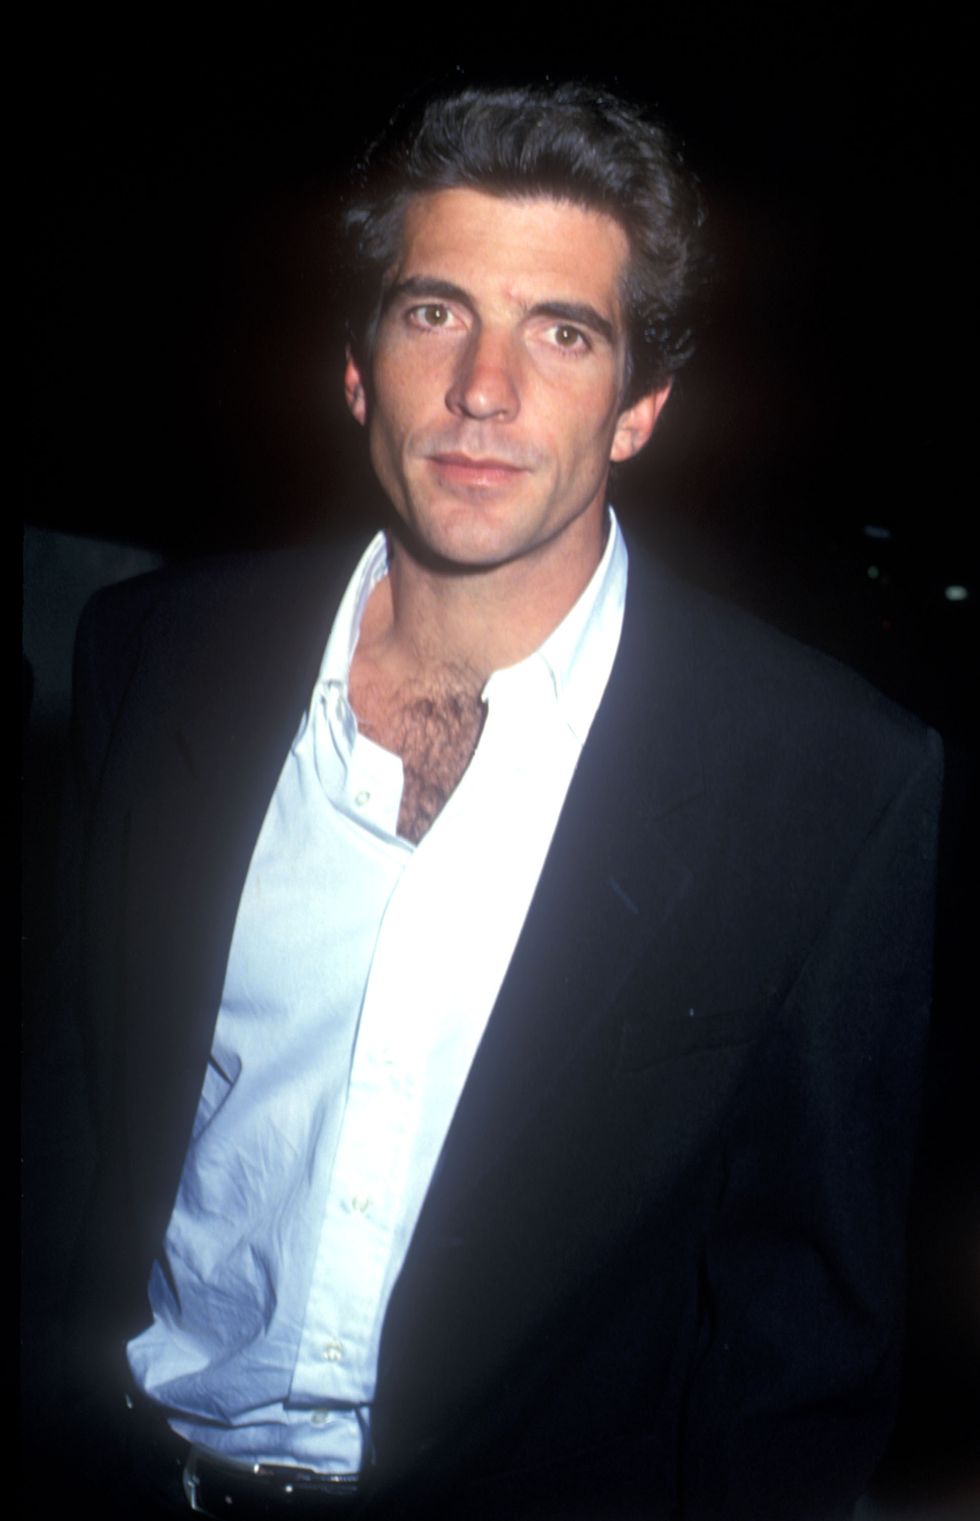 1993 file photo of john f kennedy jr at the various venues in los angeles, california photo by barry kingwireimage